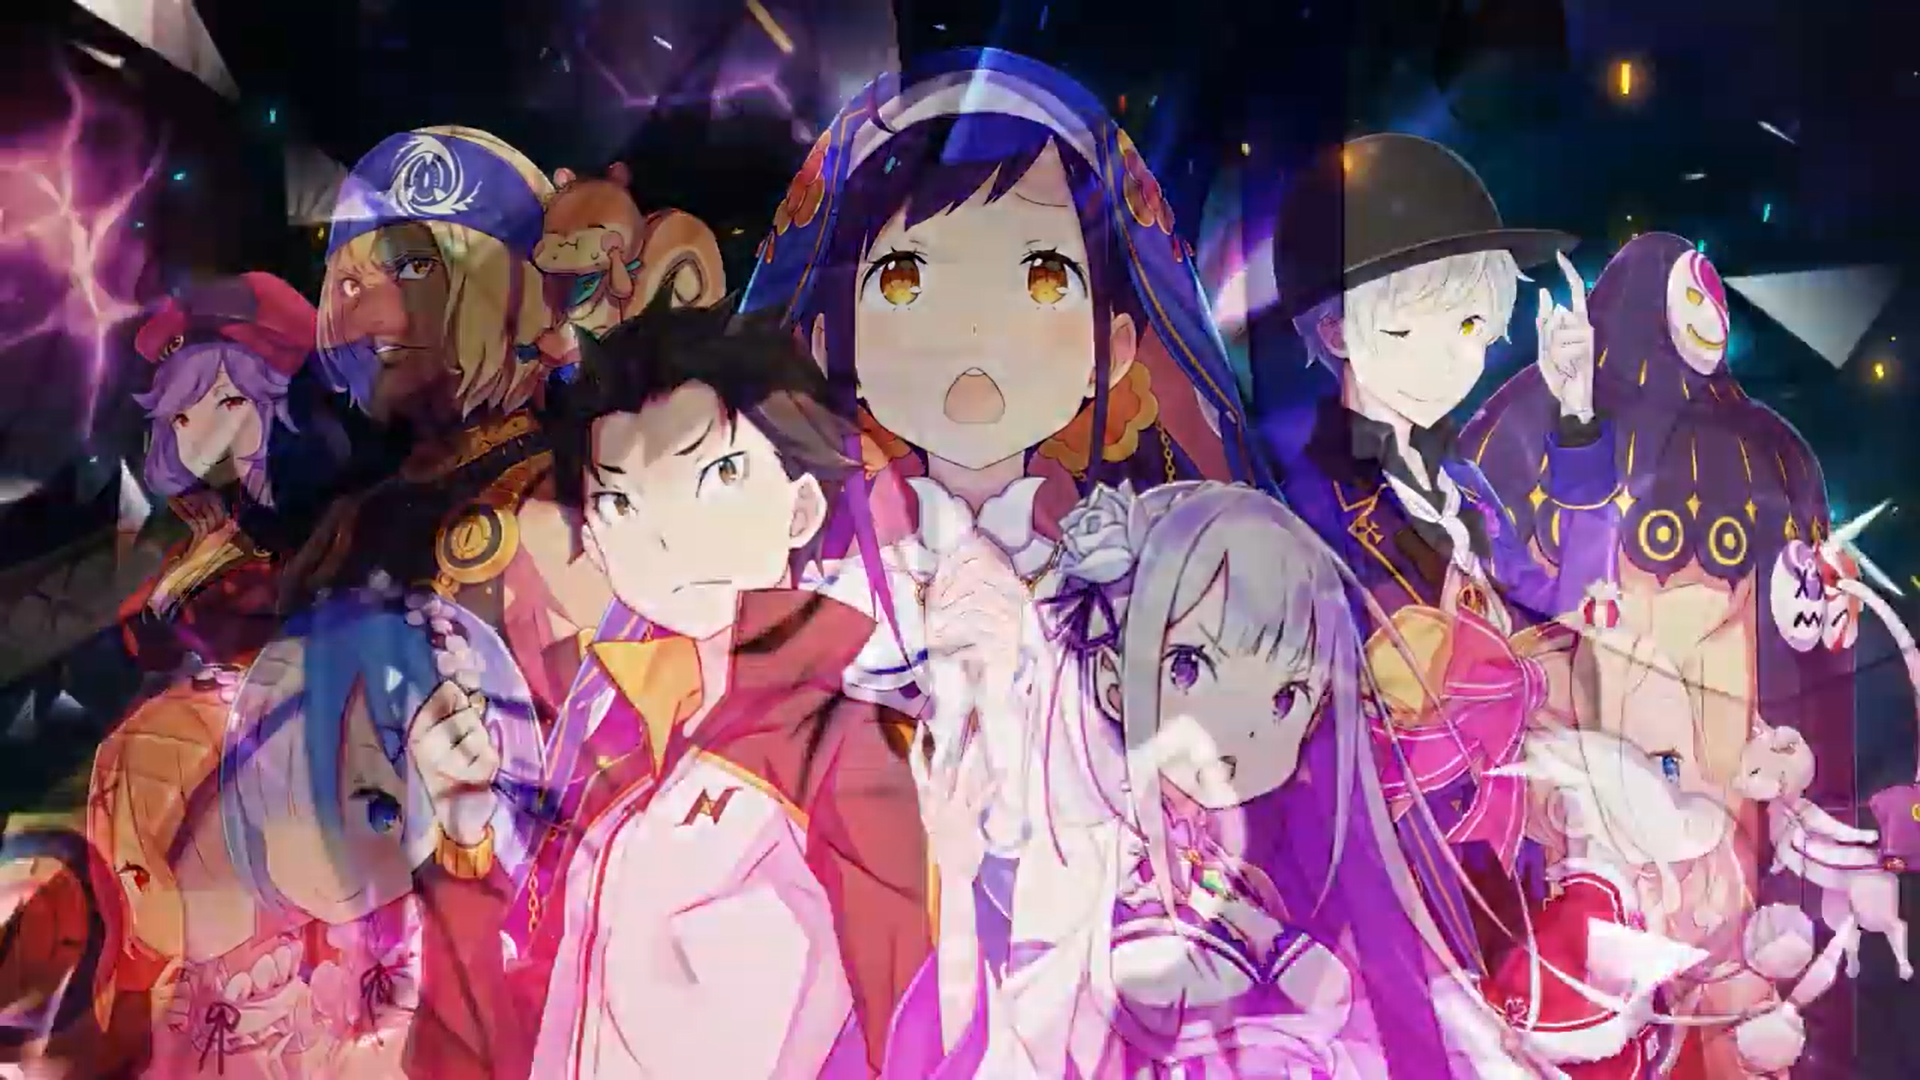 Re:Zero -starting Life in another World- the Prophecy of the Throne. Re Zero эндинг. Re Zero the Prophecy of the Throne русификатор. Re:Zero – starting Life in another World: the Prophecy of the Throne русификатор. Re switched